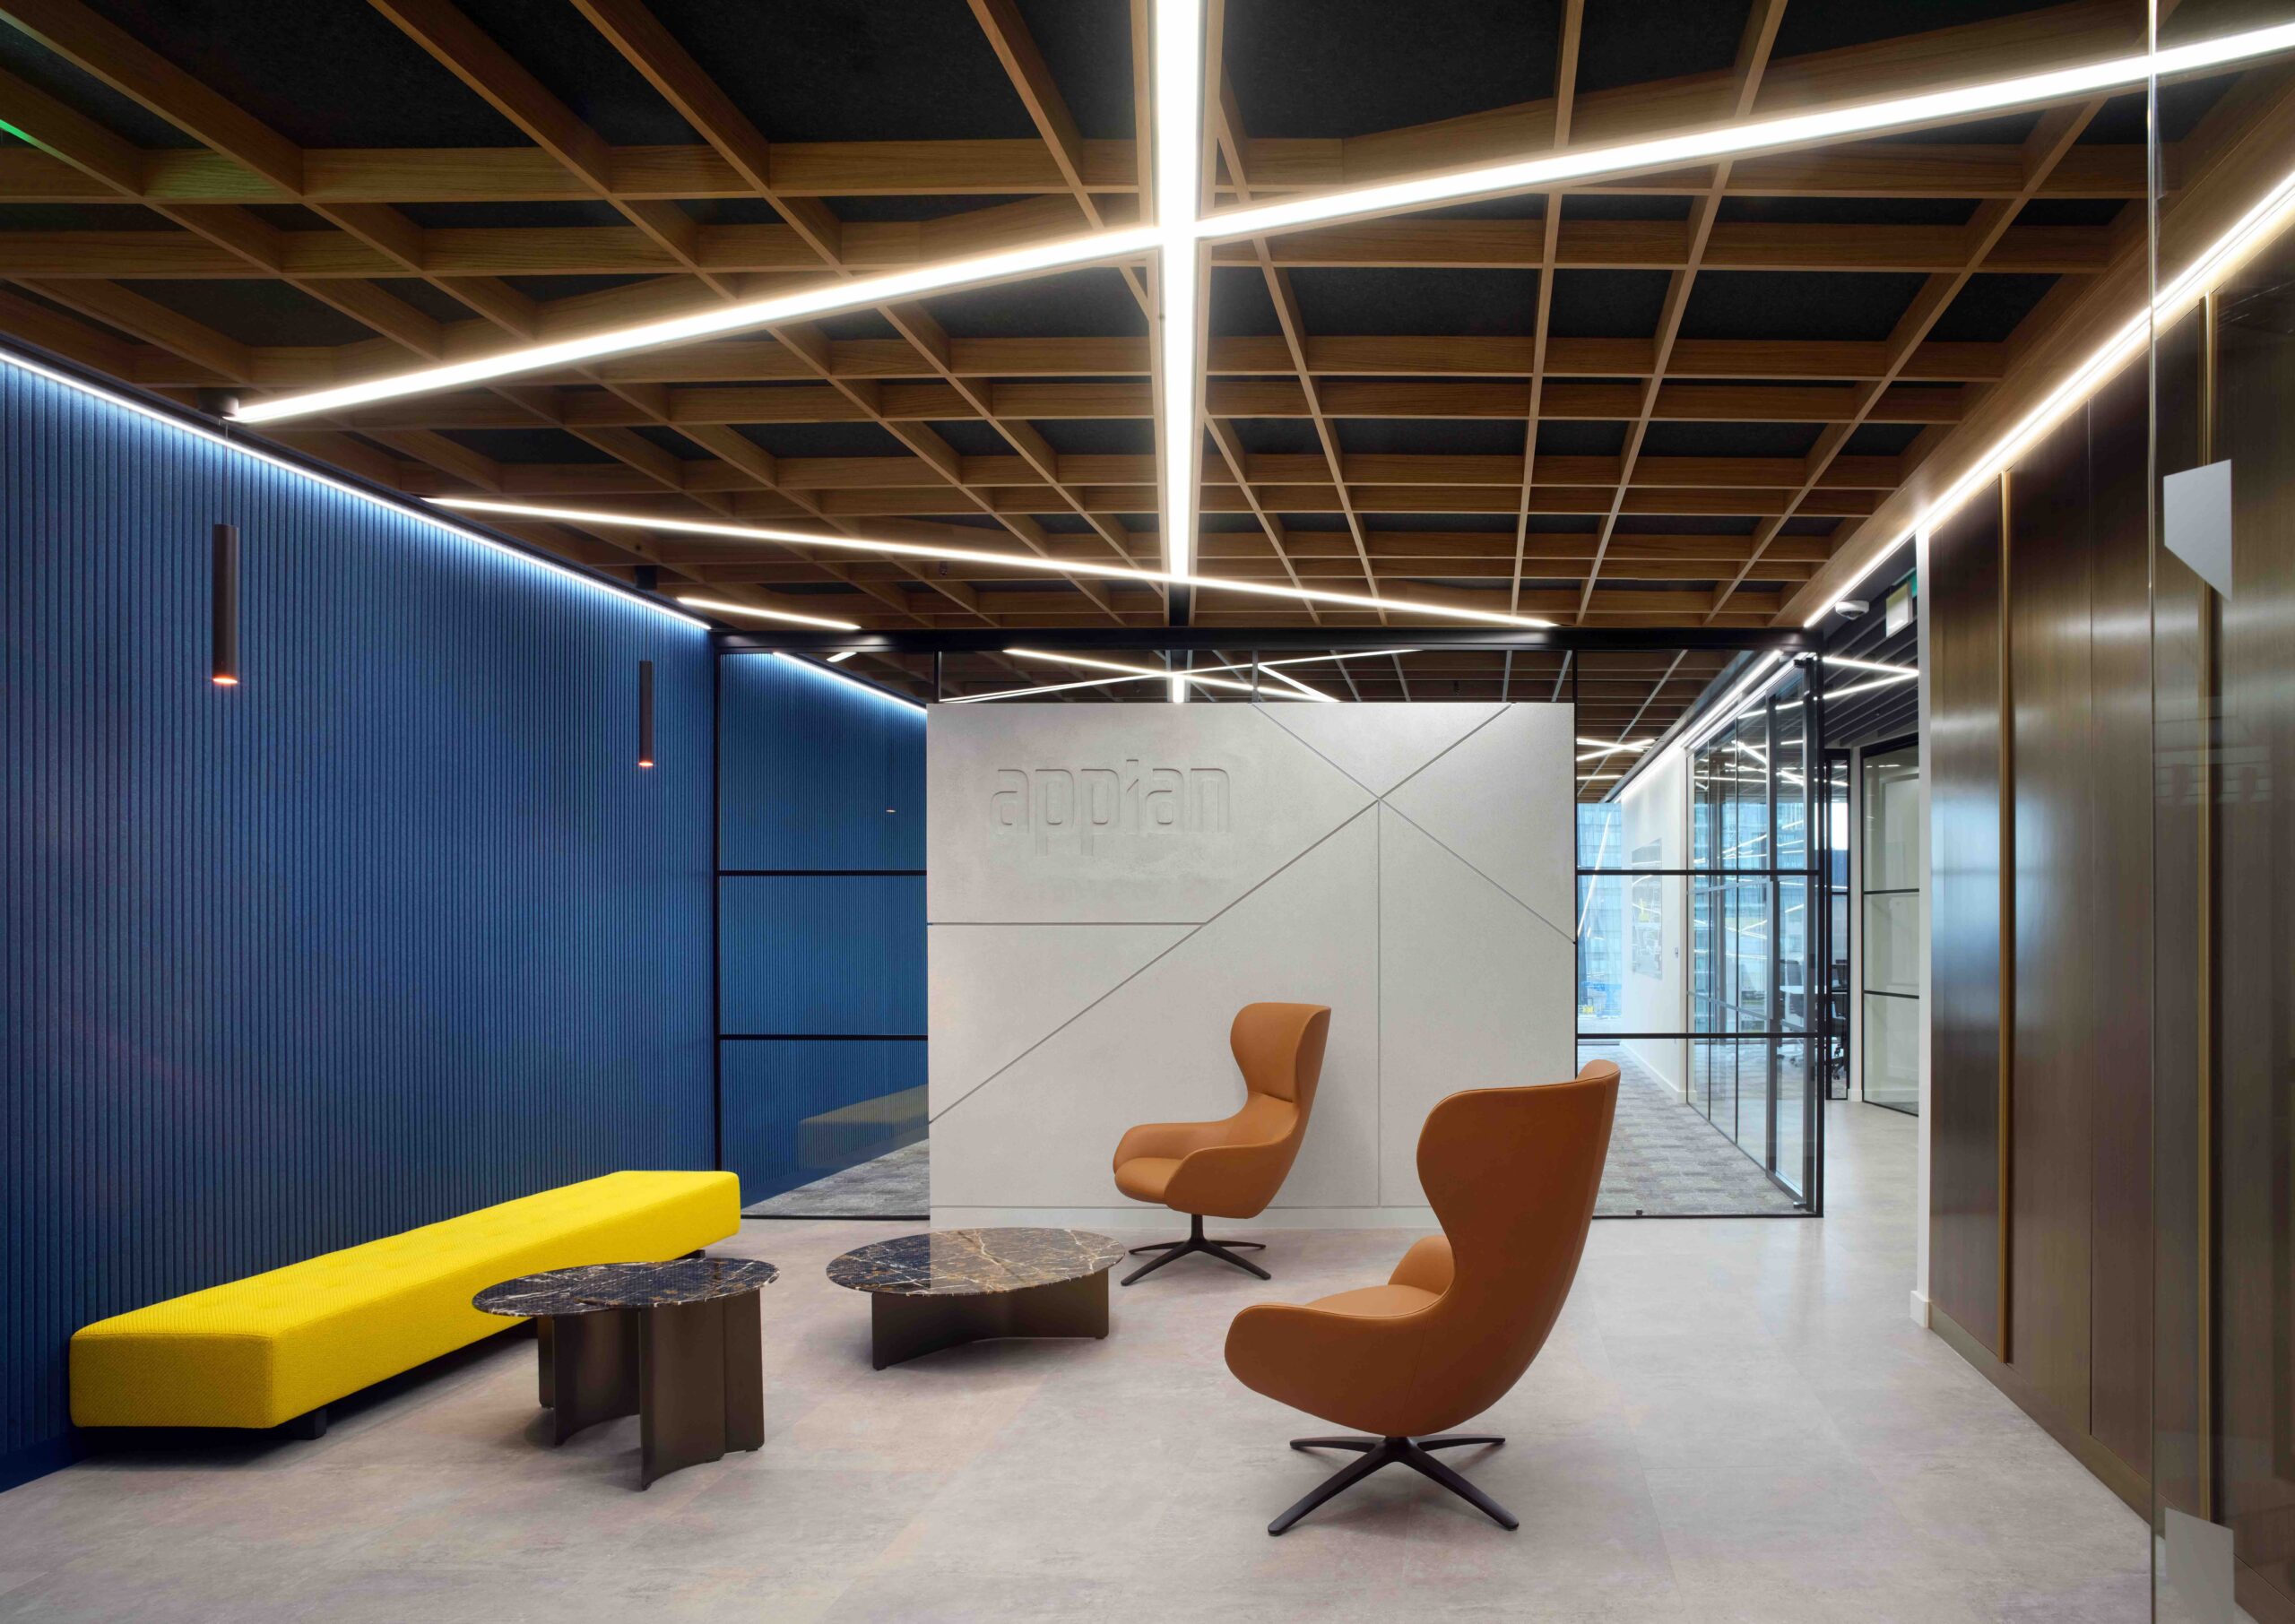 Resonate completes new office for Appian in the Iconic Walkie Talkie